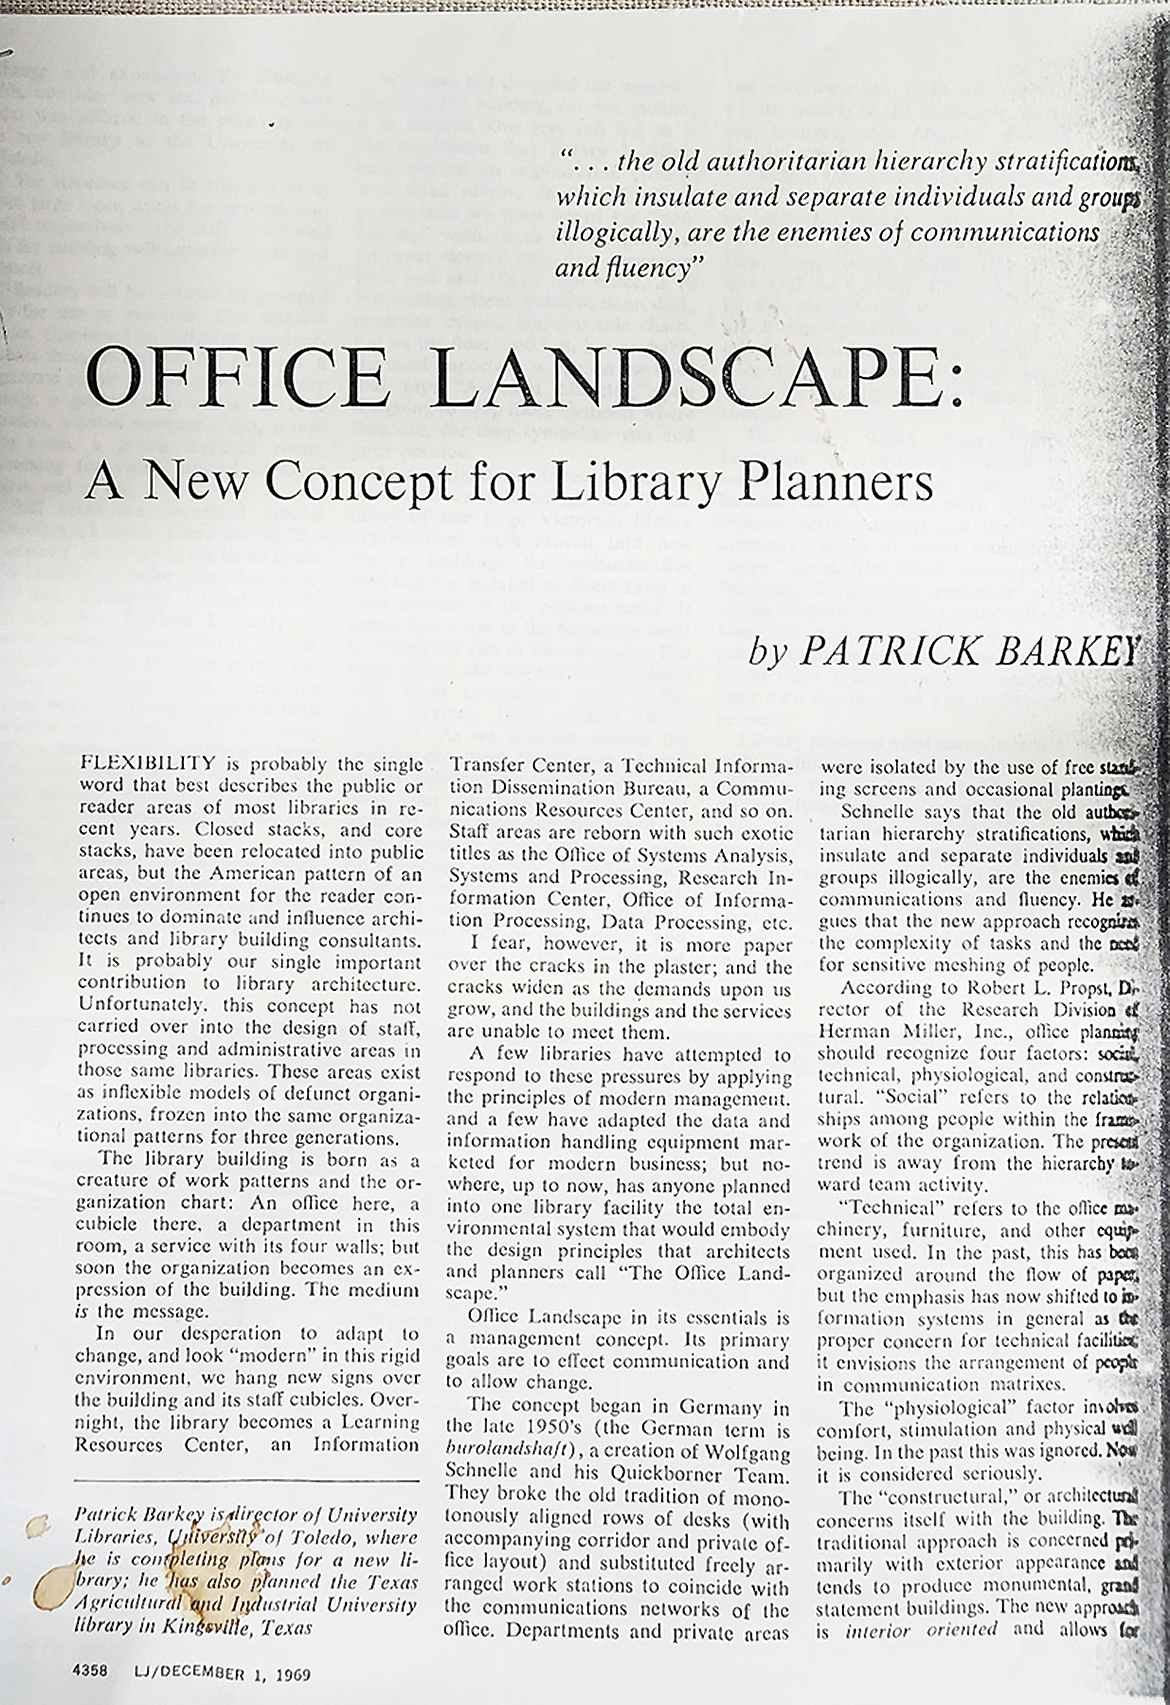 Office Landscape: A New Concept for Library Planners (by Patick Barkey)